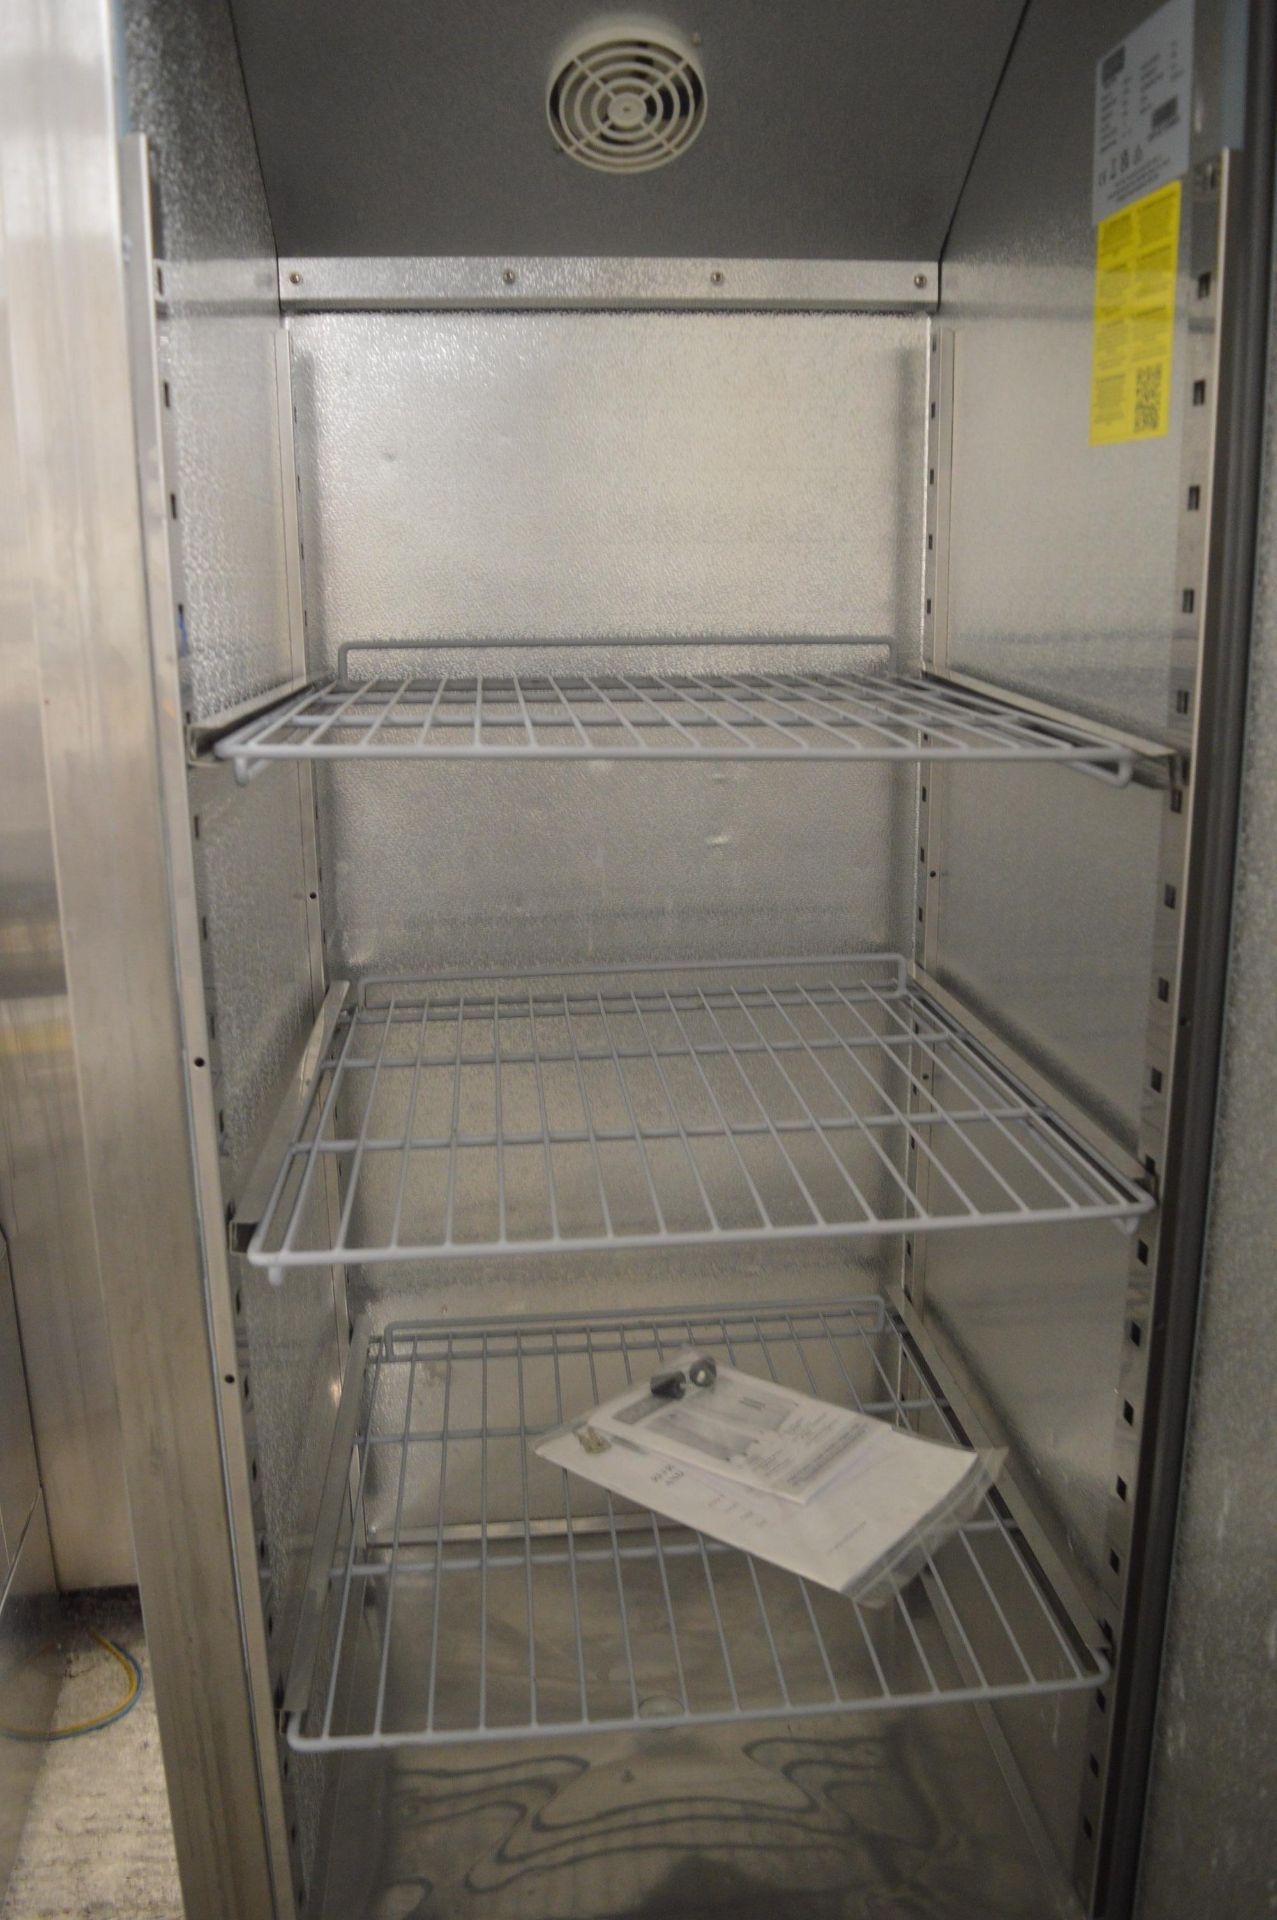 Polar Stainless Steel Upright Freezer 190cm tall - Image 2 of 2